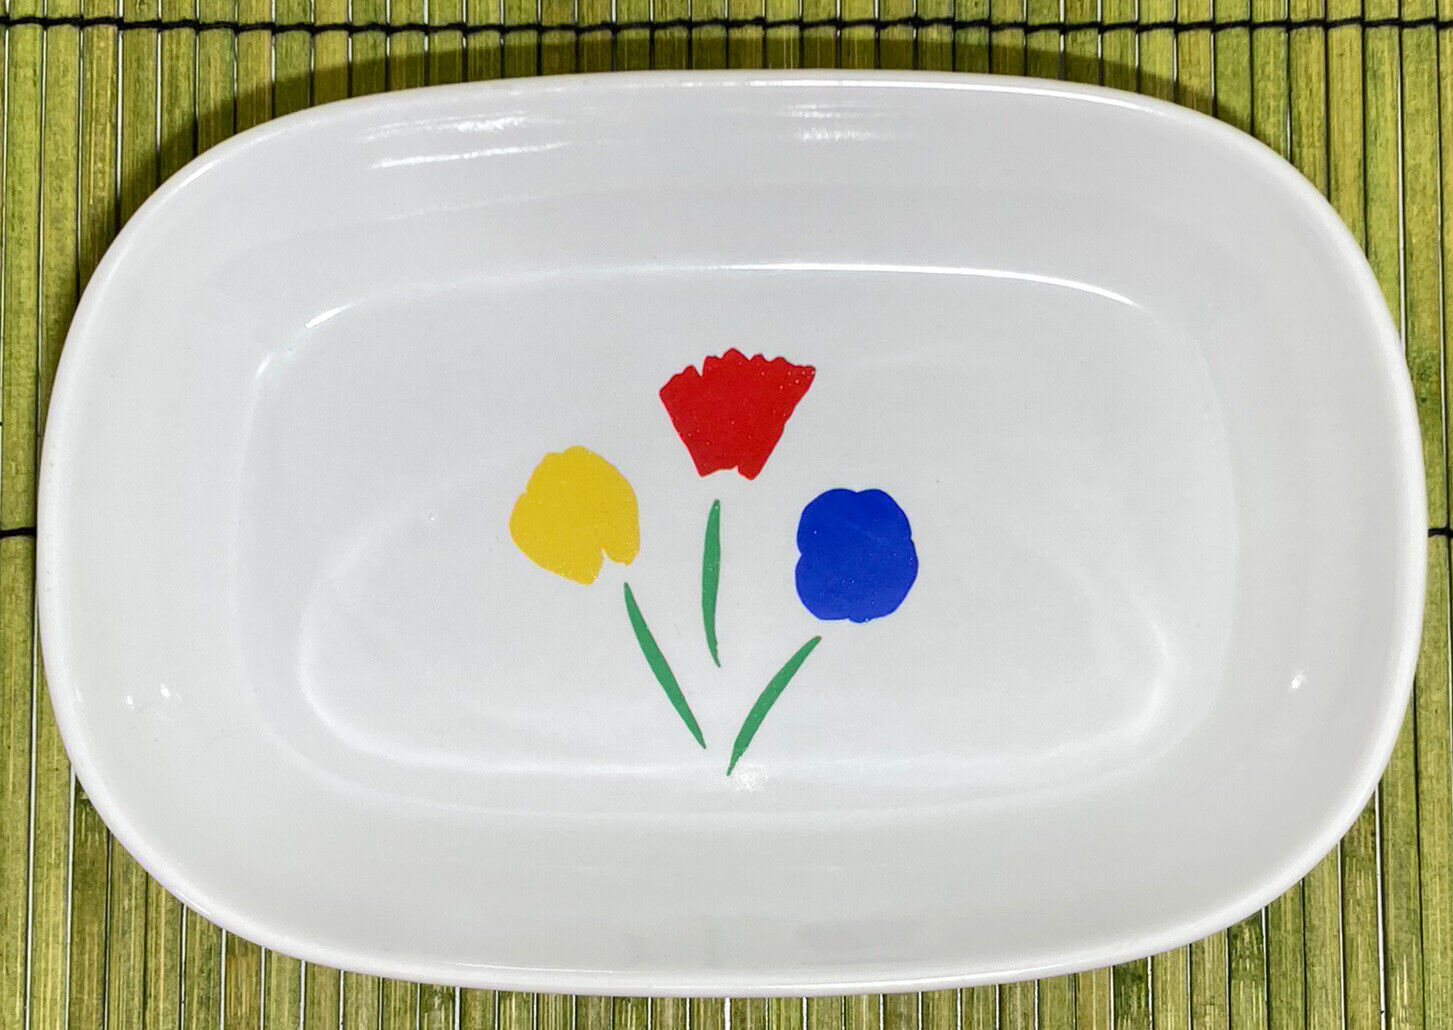 Vintage Delta Airlines Pfaltzgraff Ceramic Snack Tray Yellow Red Blue Flowers